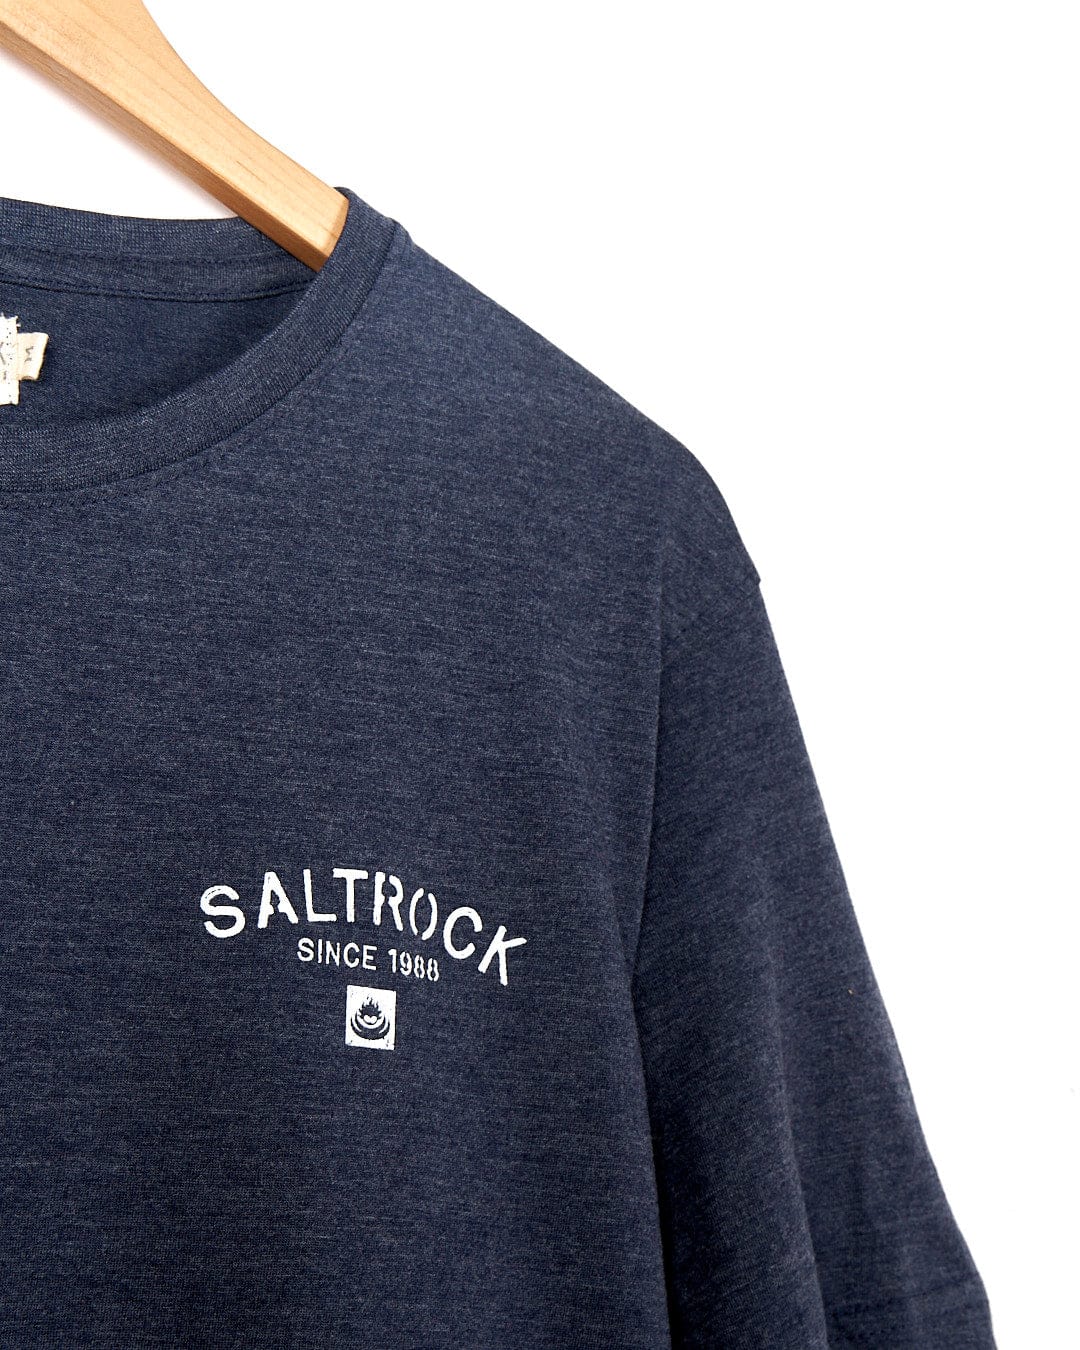 A navy Stencil - Location T-Shirt - St Ives - Blue with the word Saltrock on it.